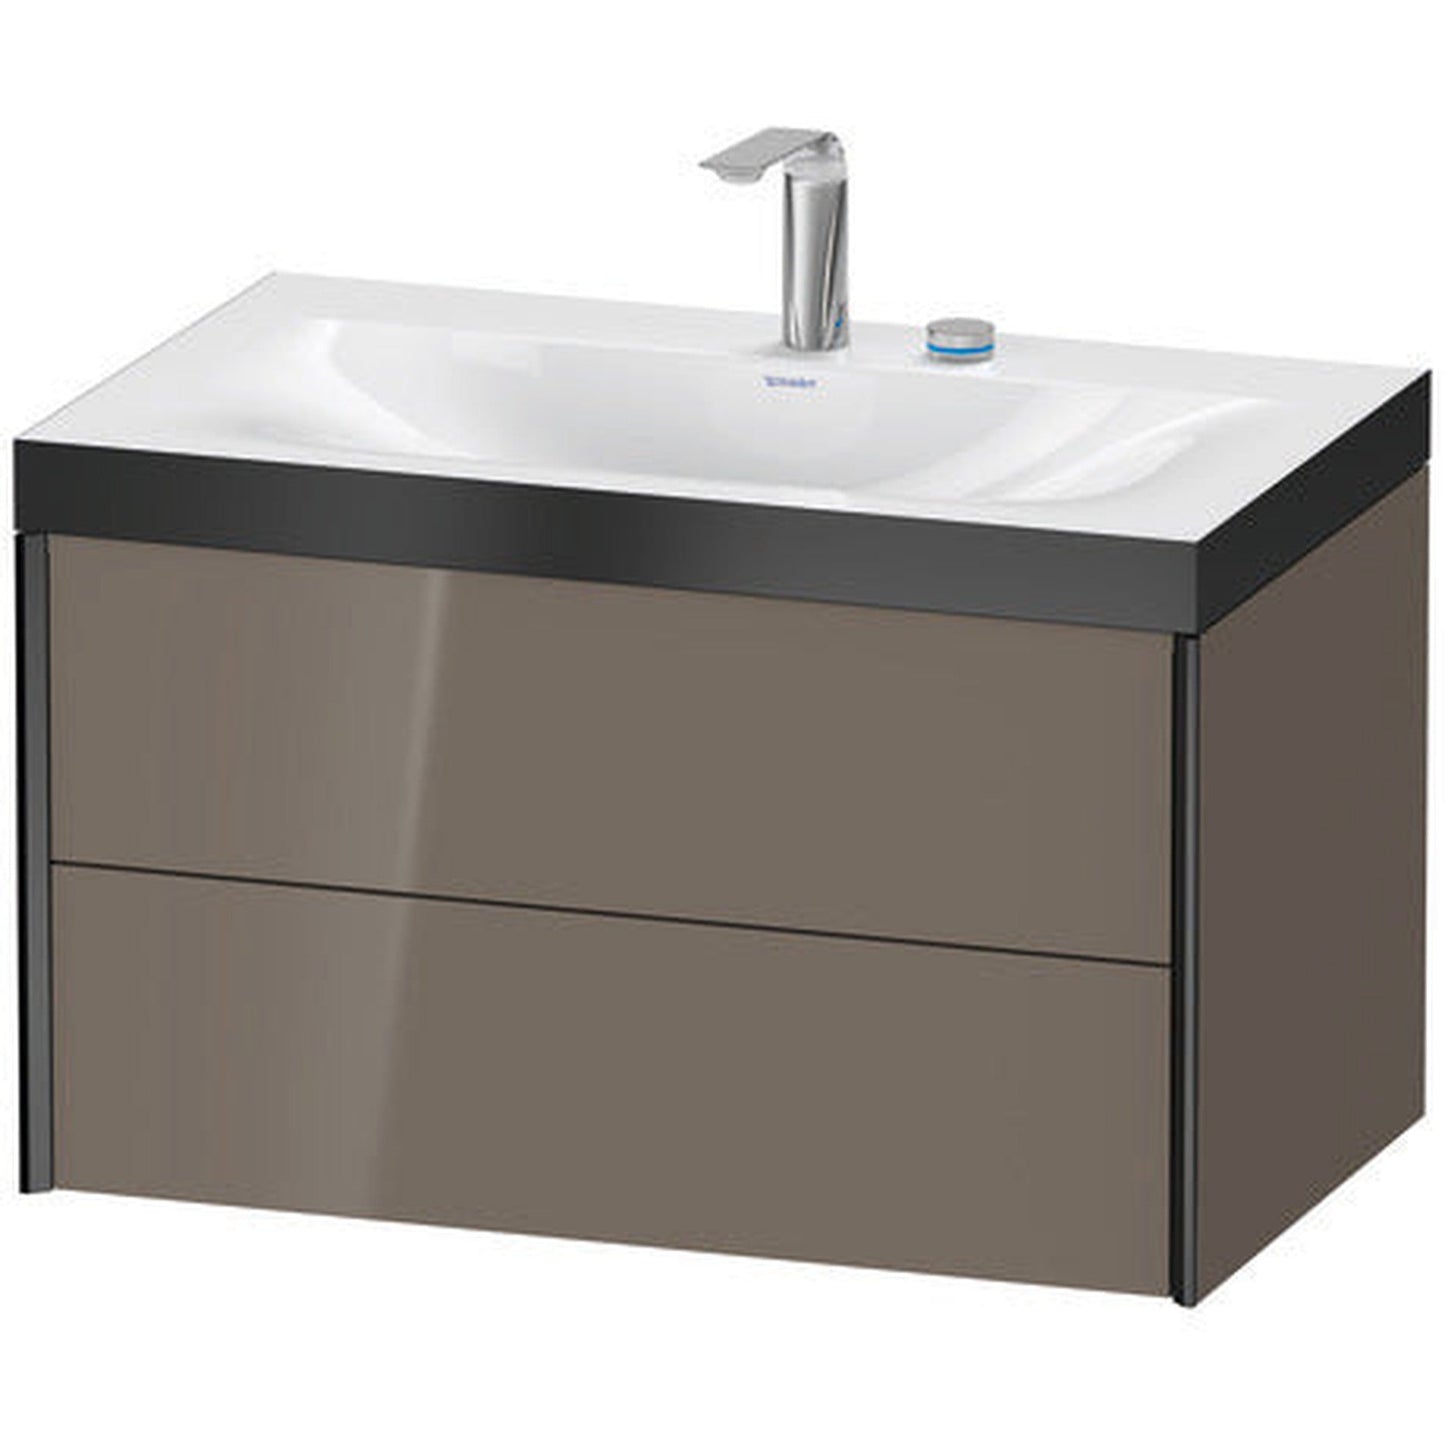 Duravit Xviu 31" x 20" x 19" Two Drawer C-Bonded Wall-Mount Vanity Kit With Two Tap Holes, Flannel Gray (XV4615EB289P)